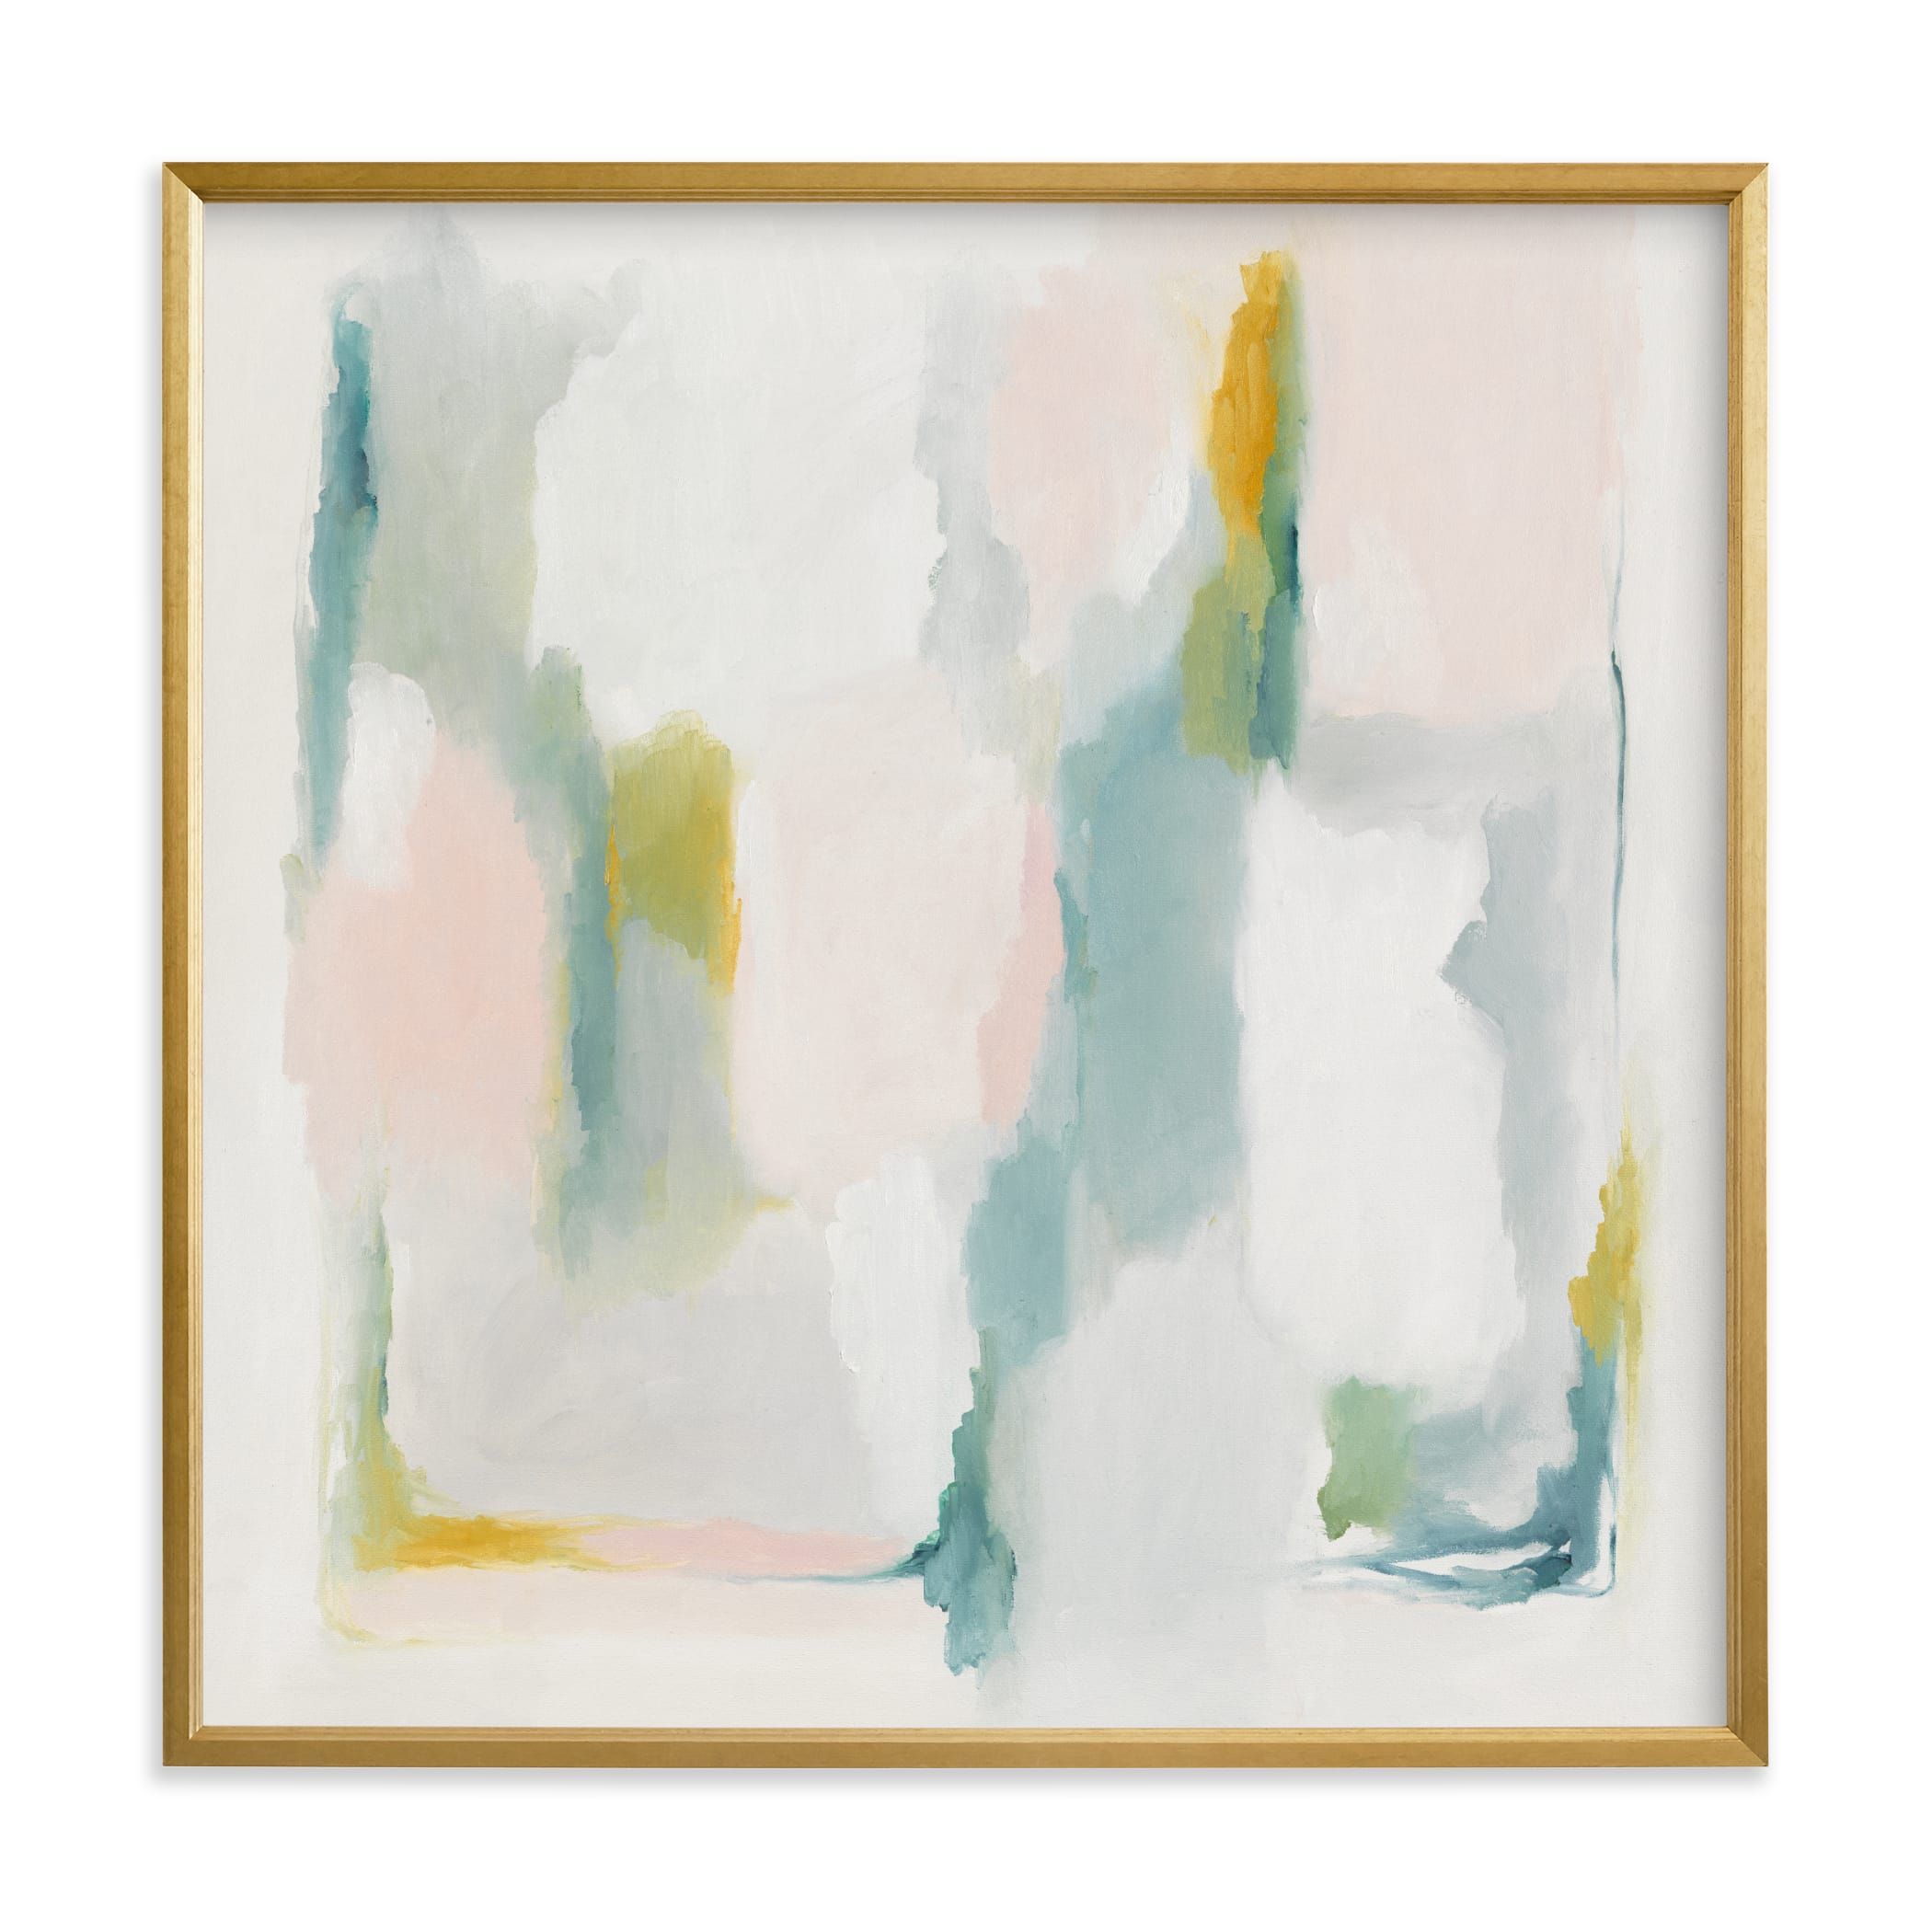 delicacy Open Edition Art Prints | Minted